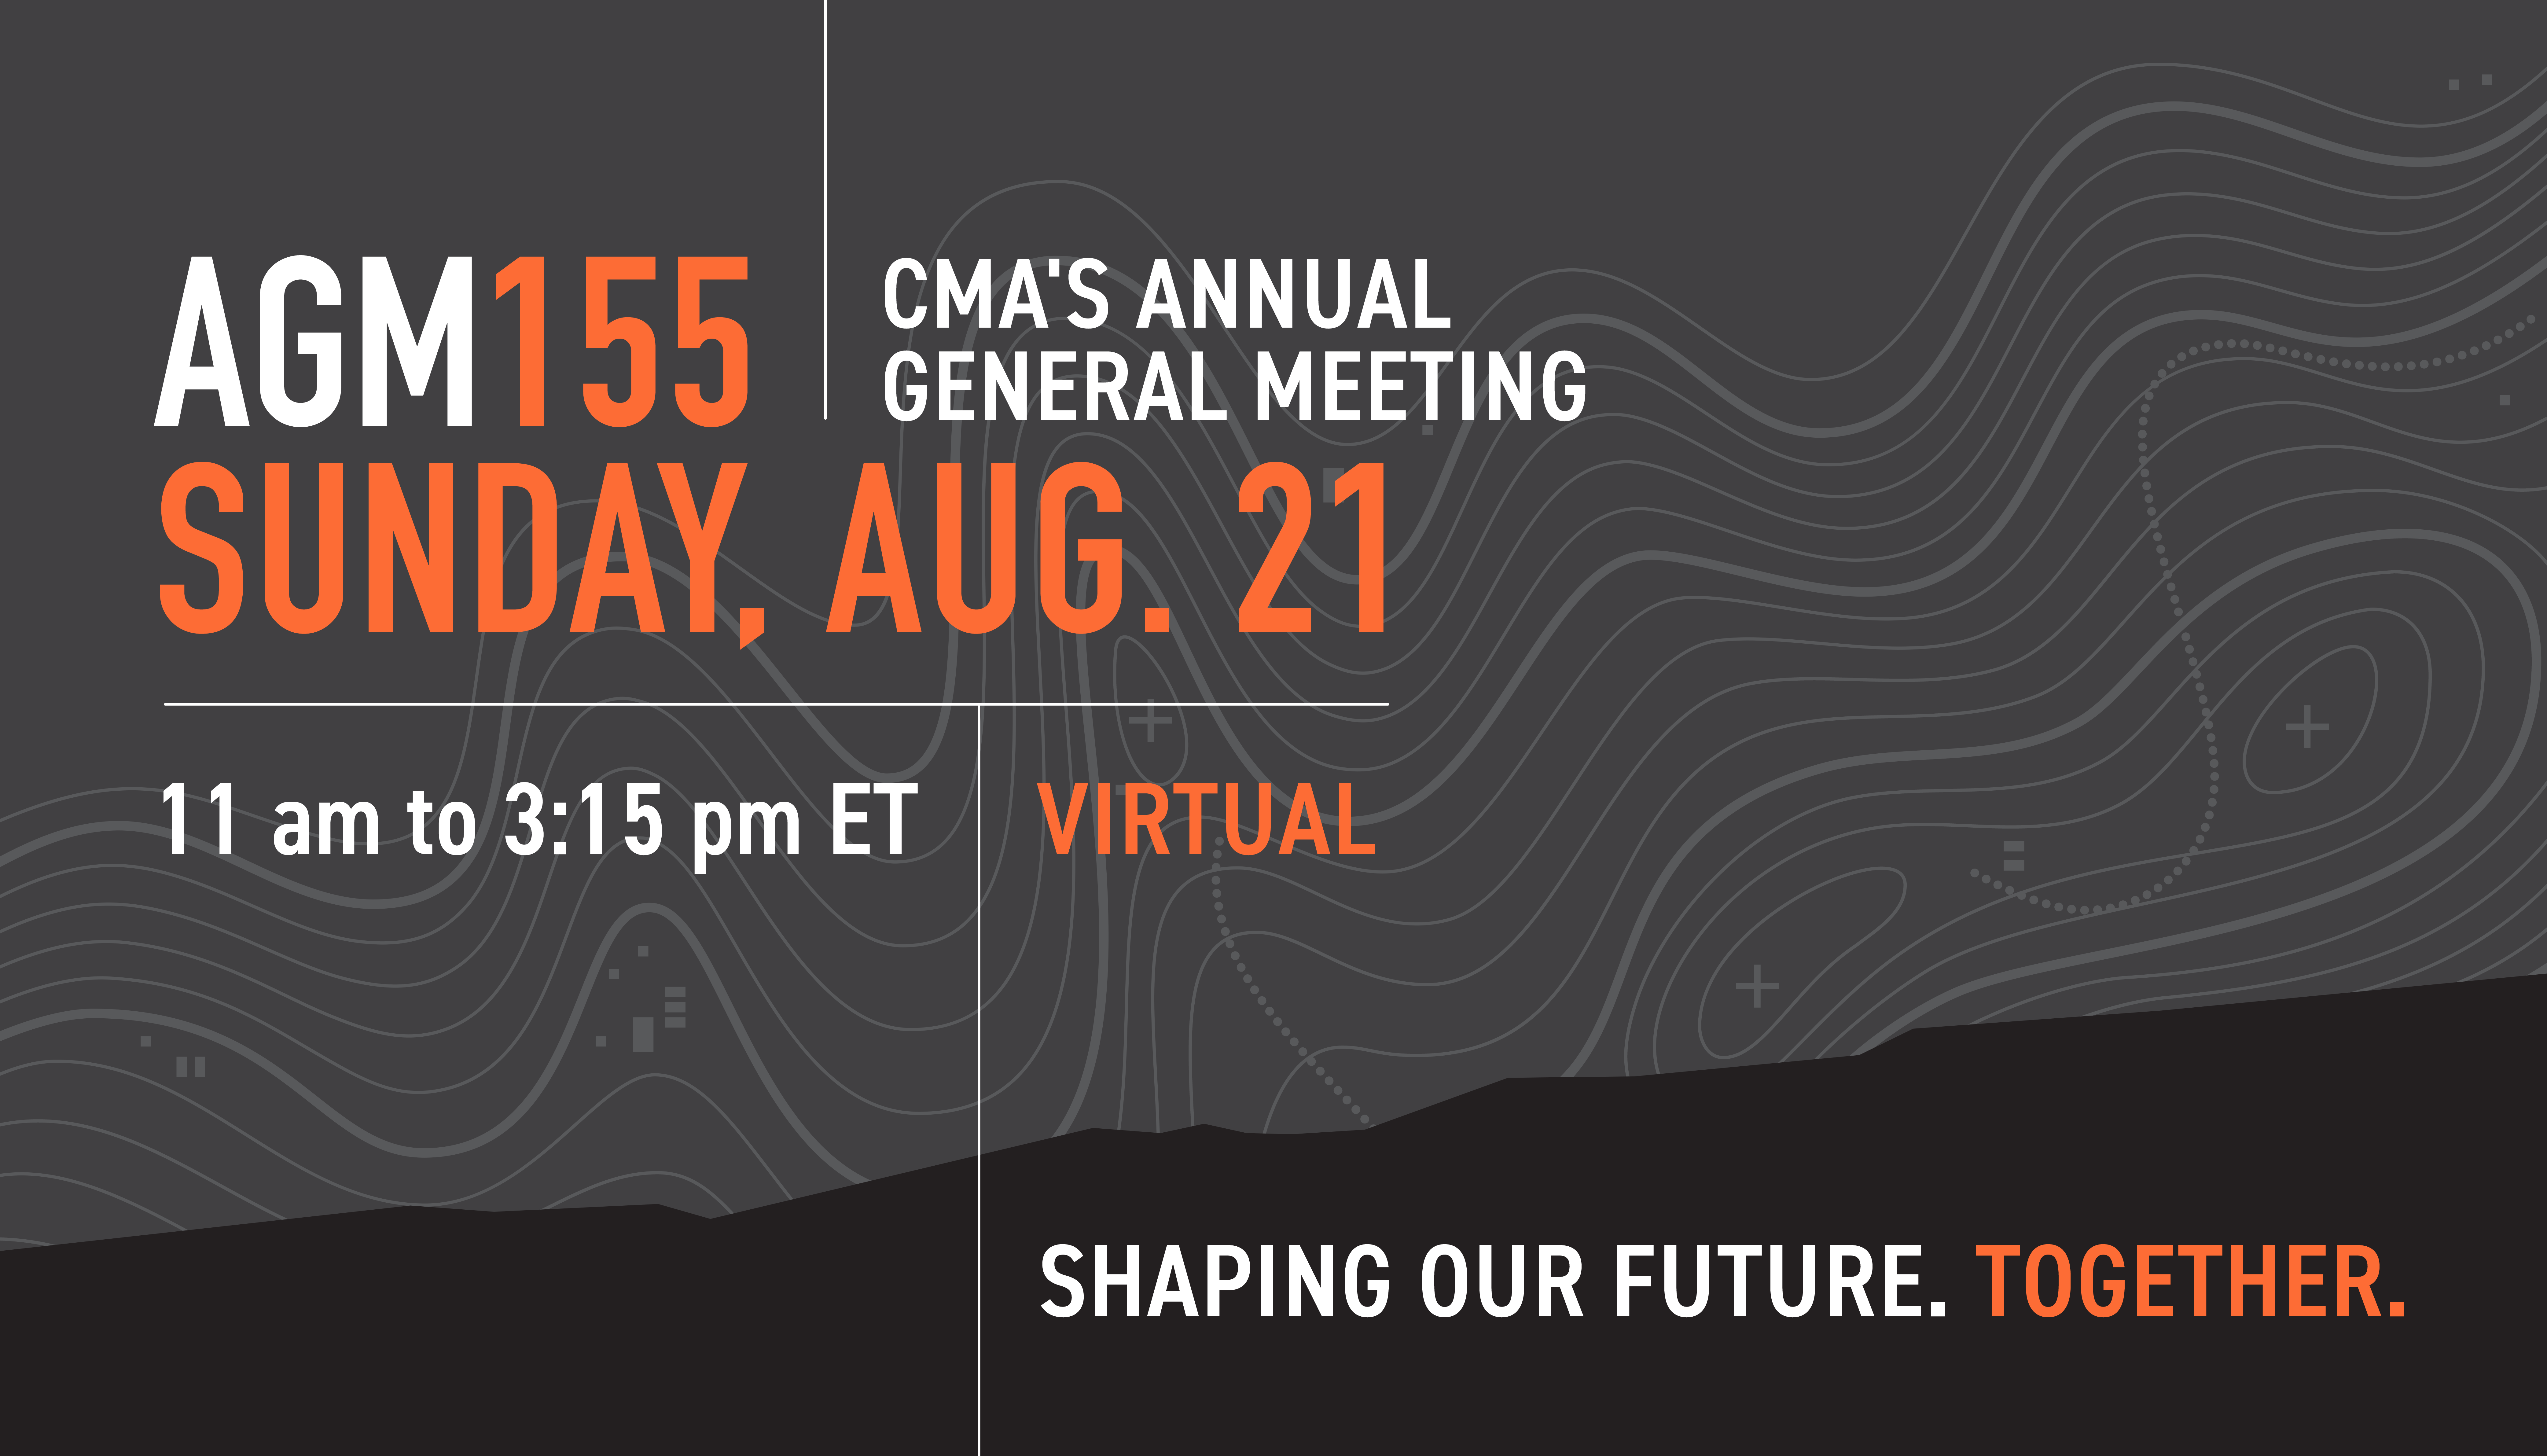 Poster for CMA AGM 2022, to be held virtually Sunday August 21, 2022 from 11am-3:15pm ET.